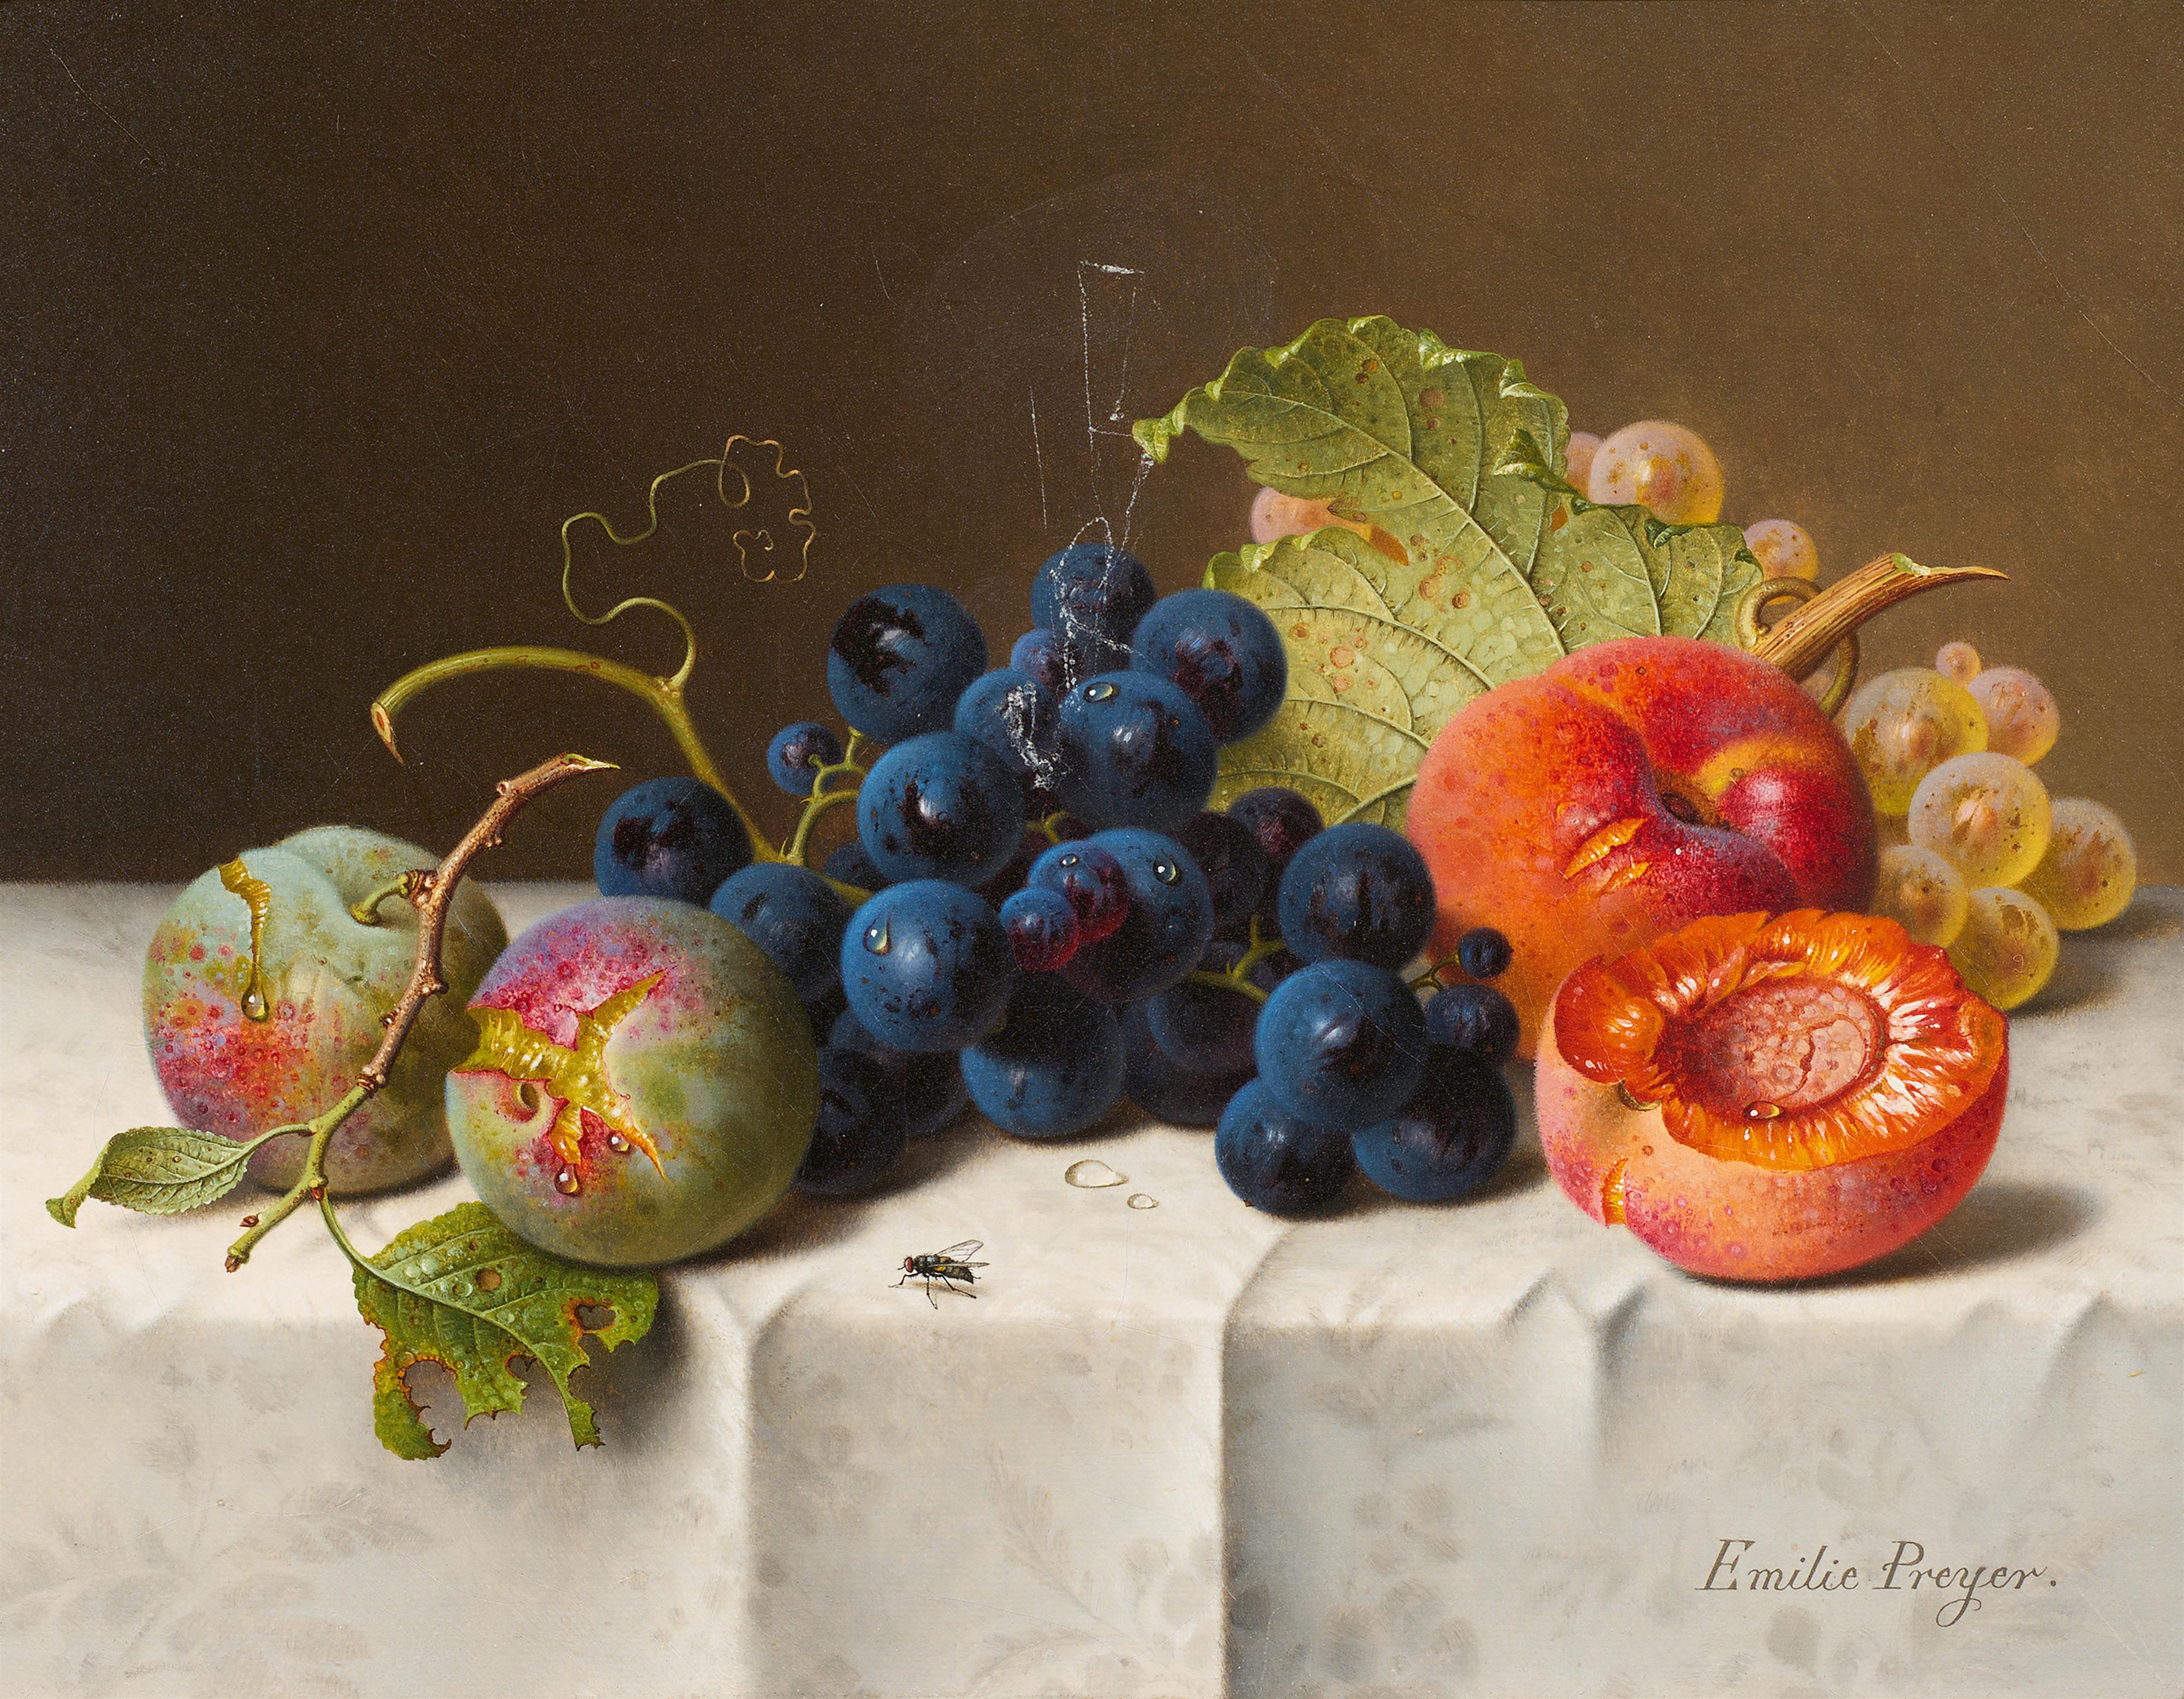 Emilie Preyer - Still Life with Plums, Grapes and Peaches on a White Tablecloth